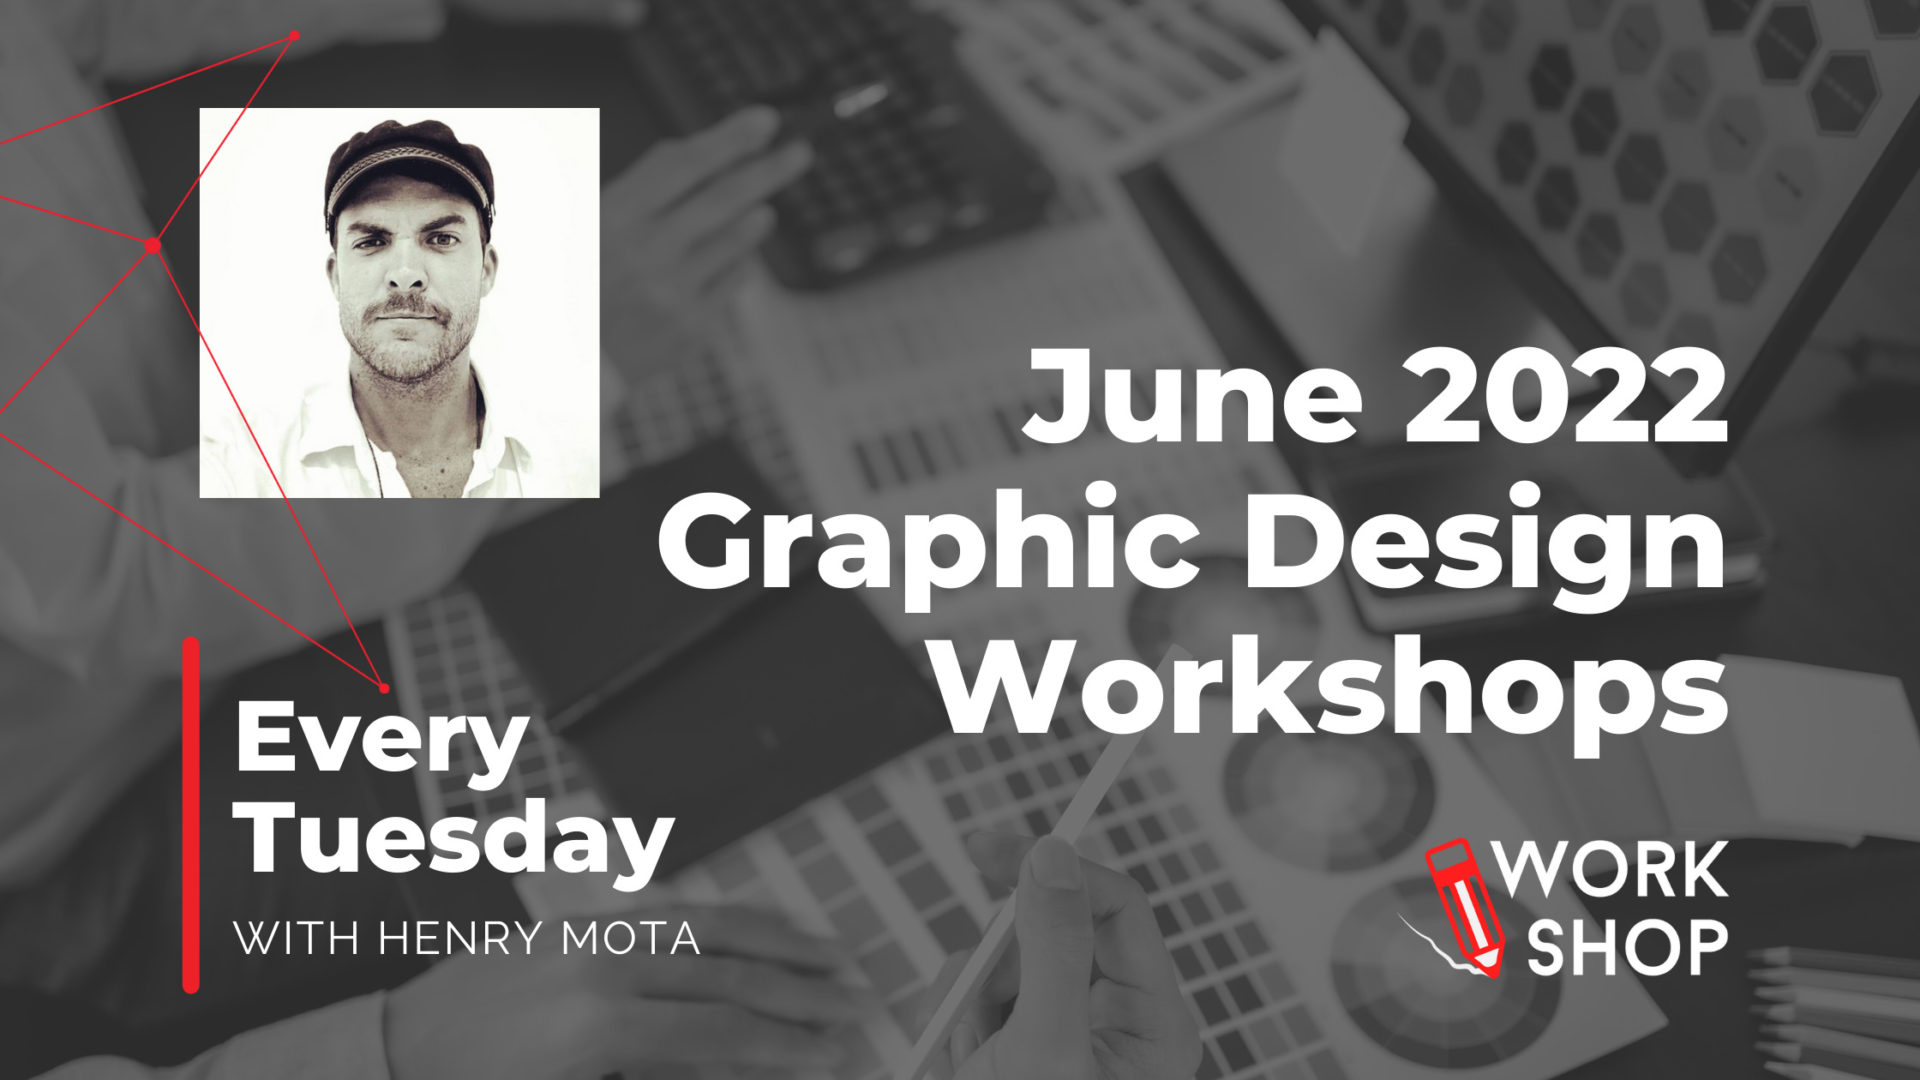 Level-up Your Design Skills with our June Graphic Design Workshops